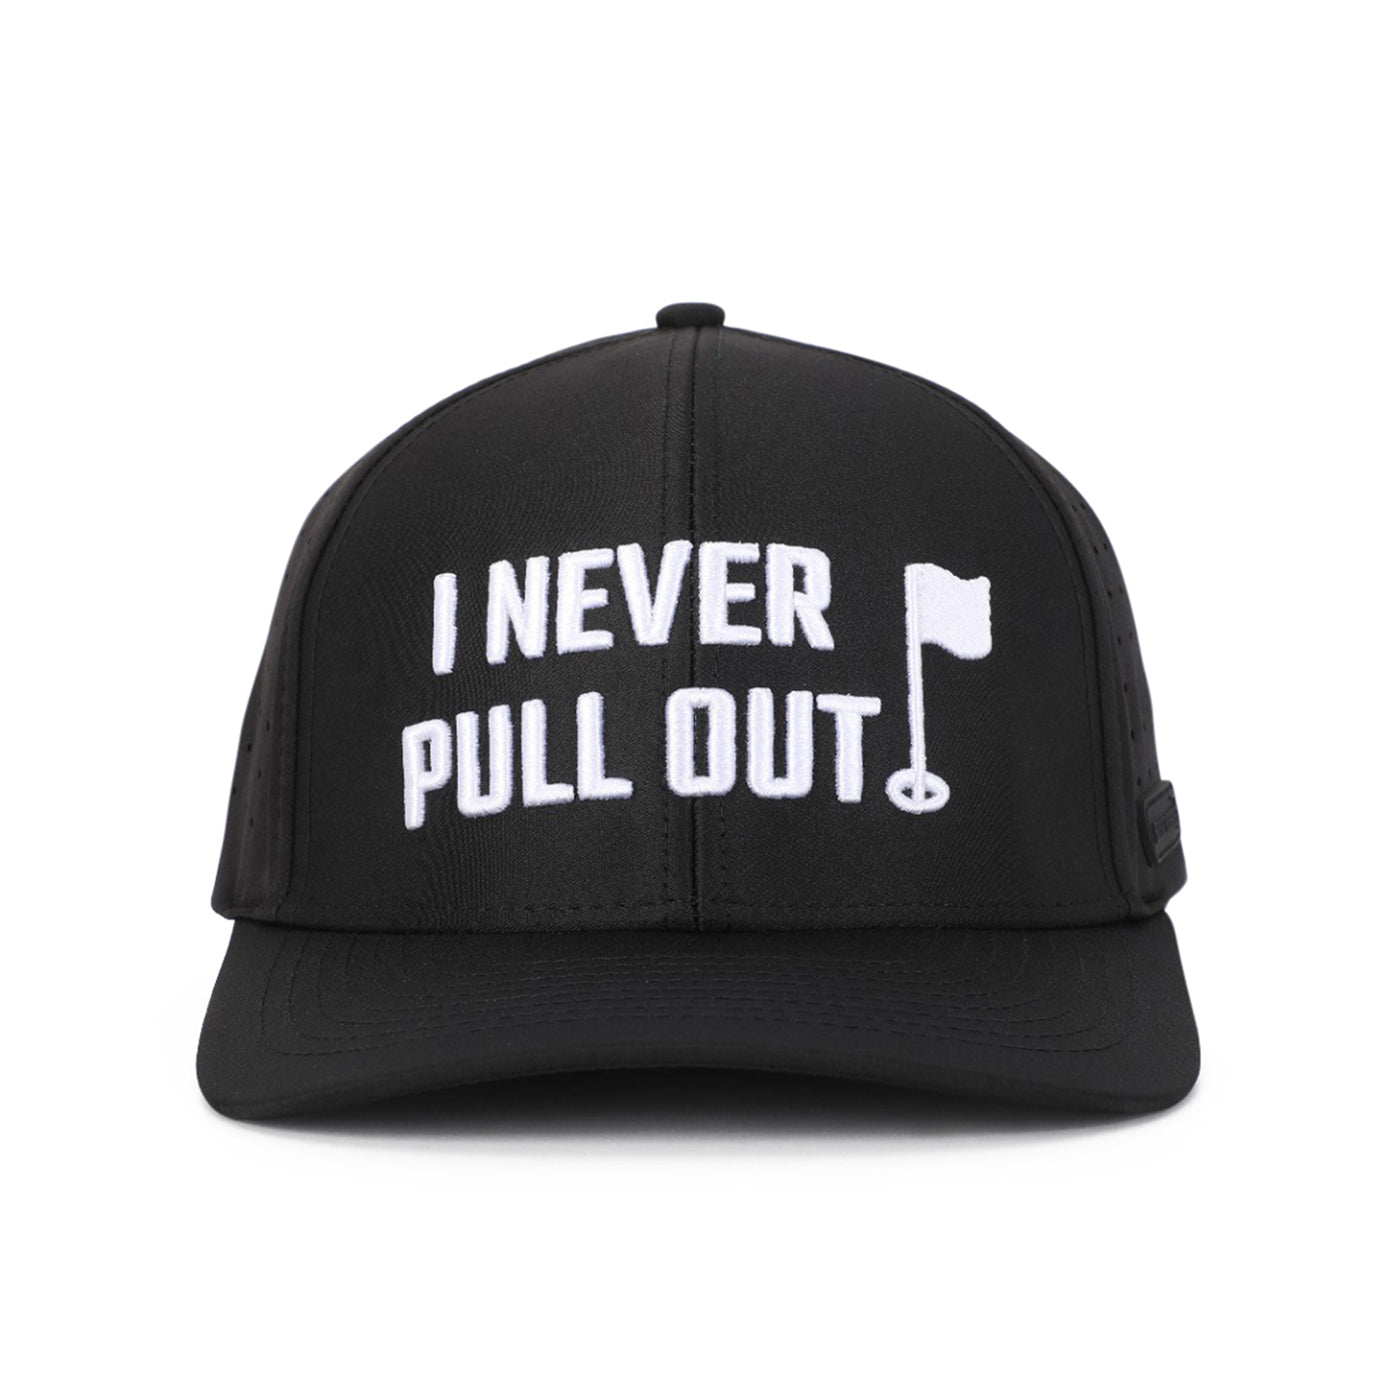 I Never Pull Out - Performance Golf Hat - Fitted